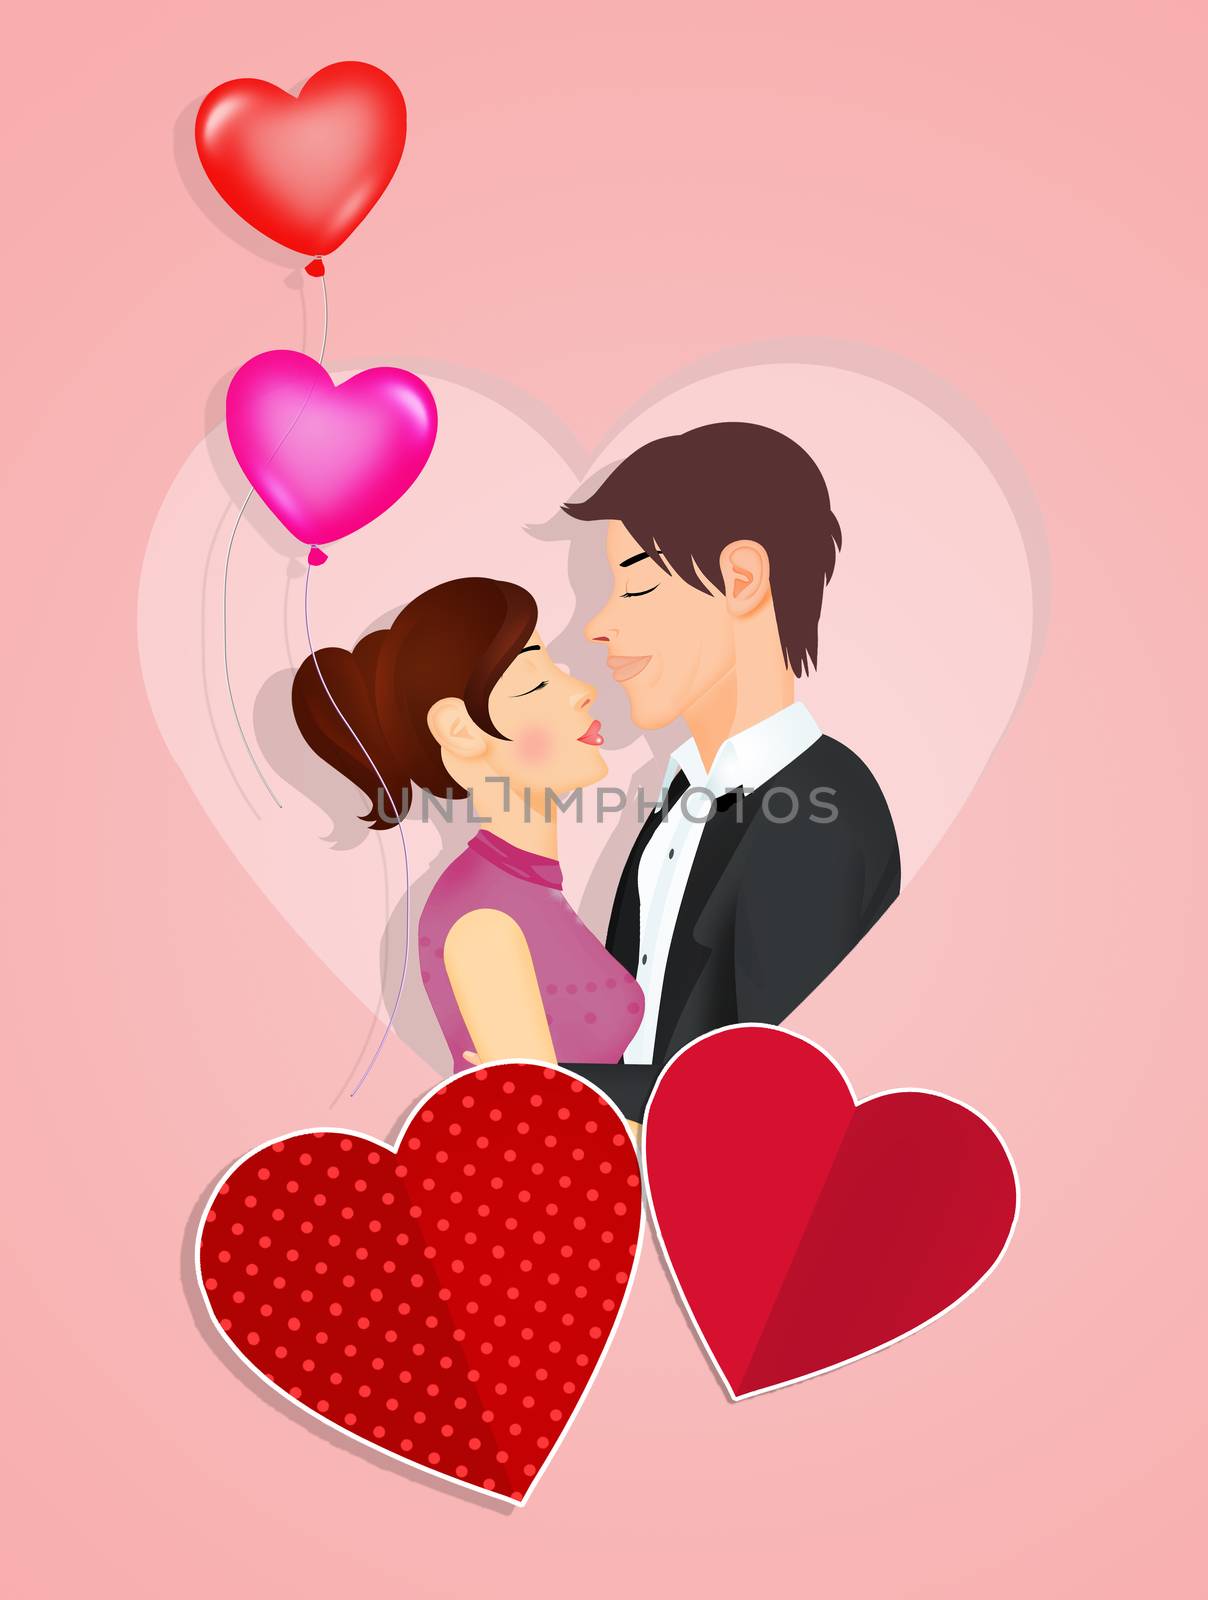 illustration of couple of lovers in the heart